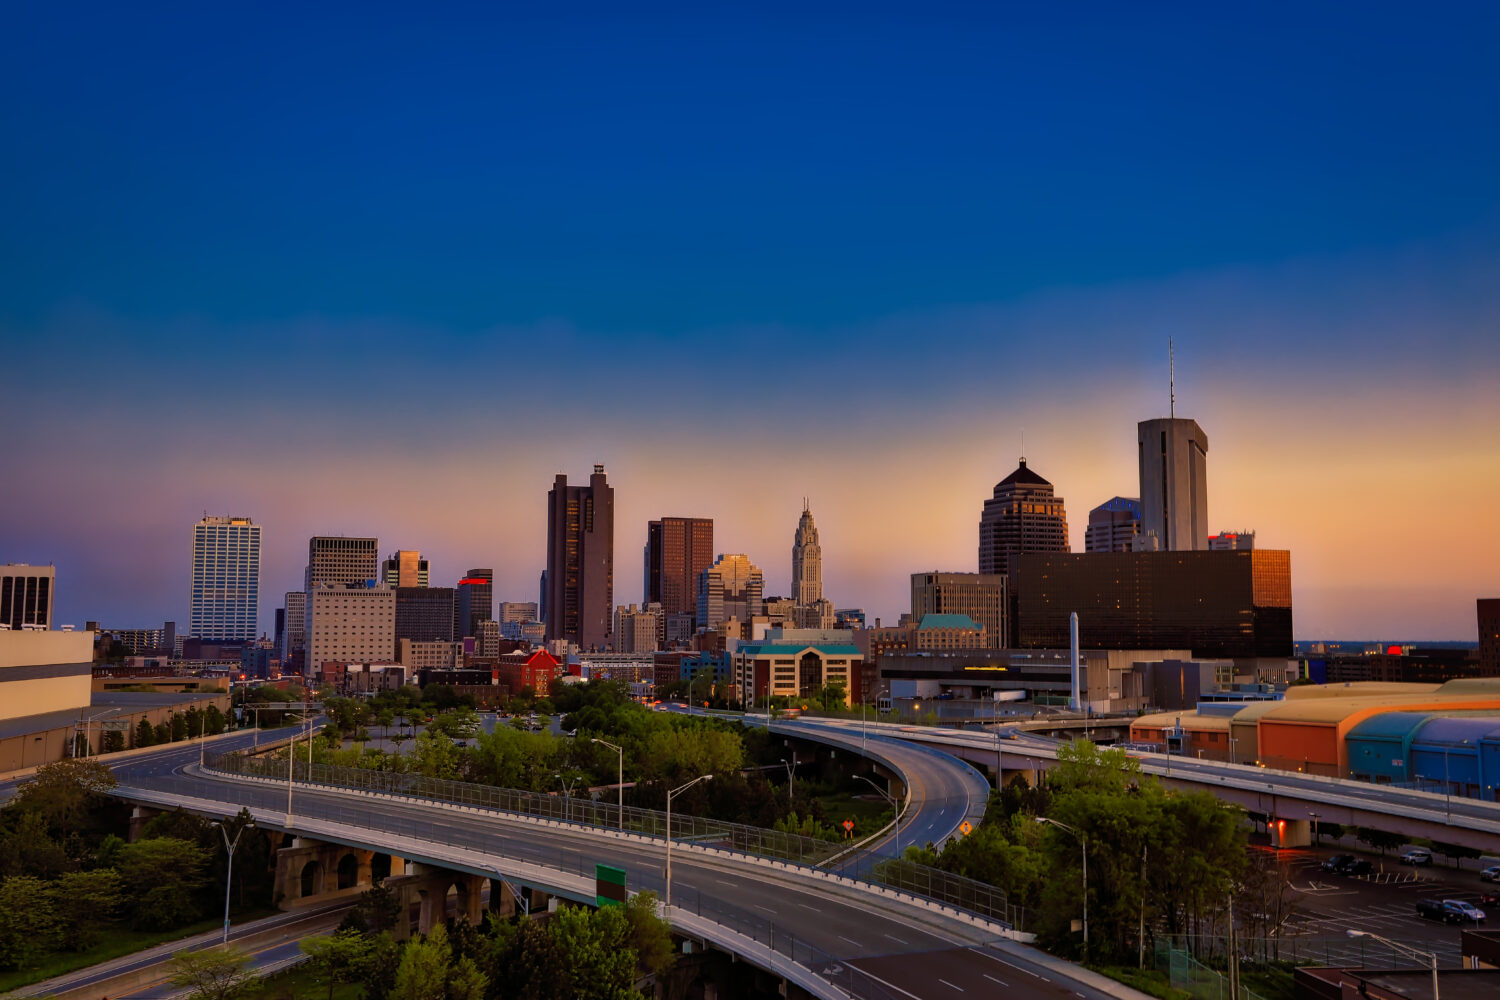 Looking south at the city of Columbus Ohio skyline at sunset.